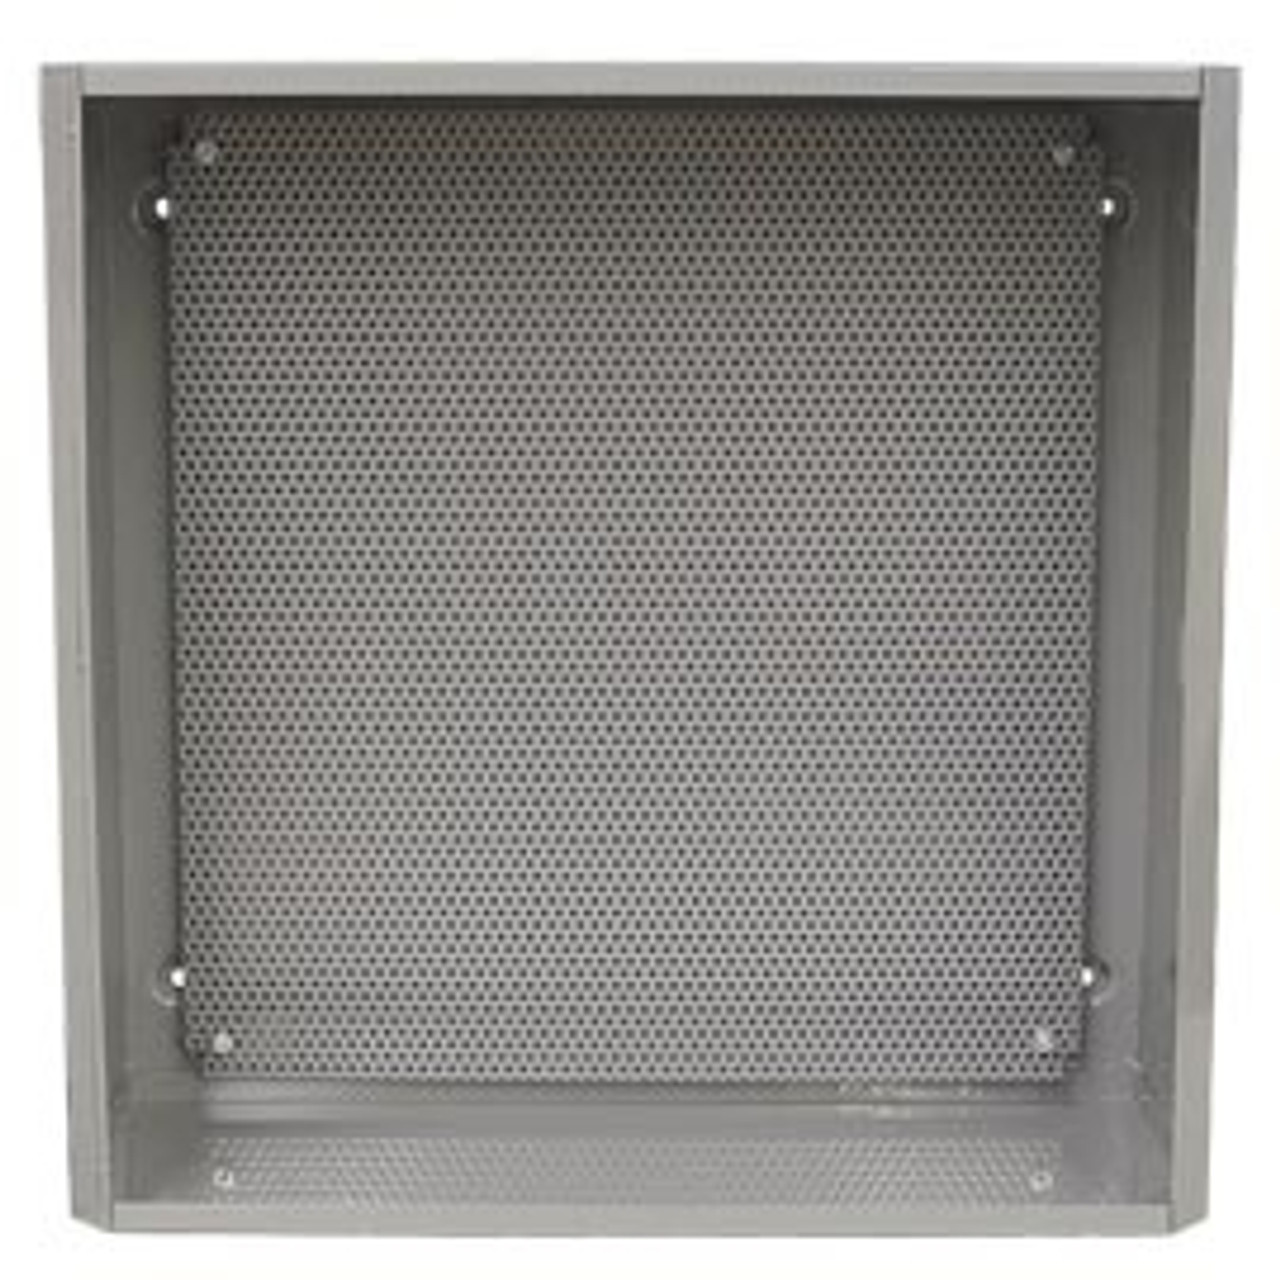 FUNCTIONAL DEVICES FUNSP4404L MH4400 Subpanel Perforated Steel 16.875H x 15.750W x .25T